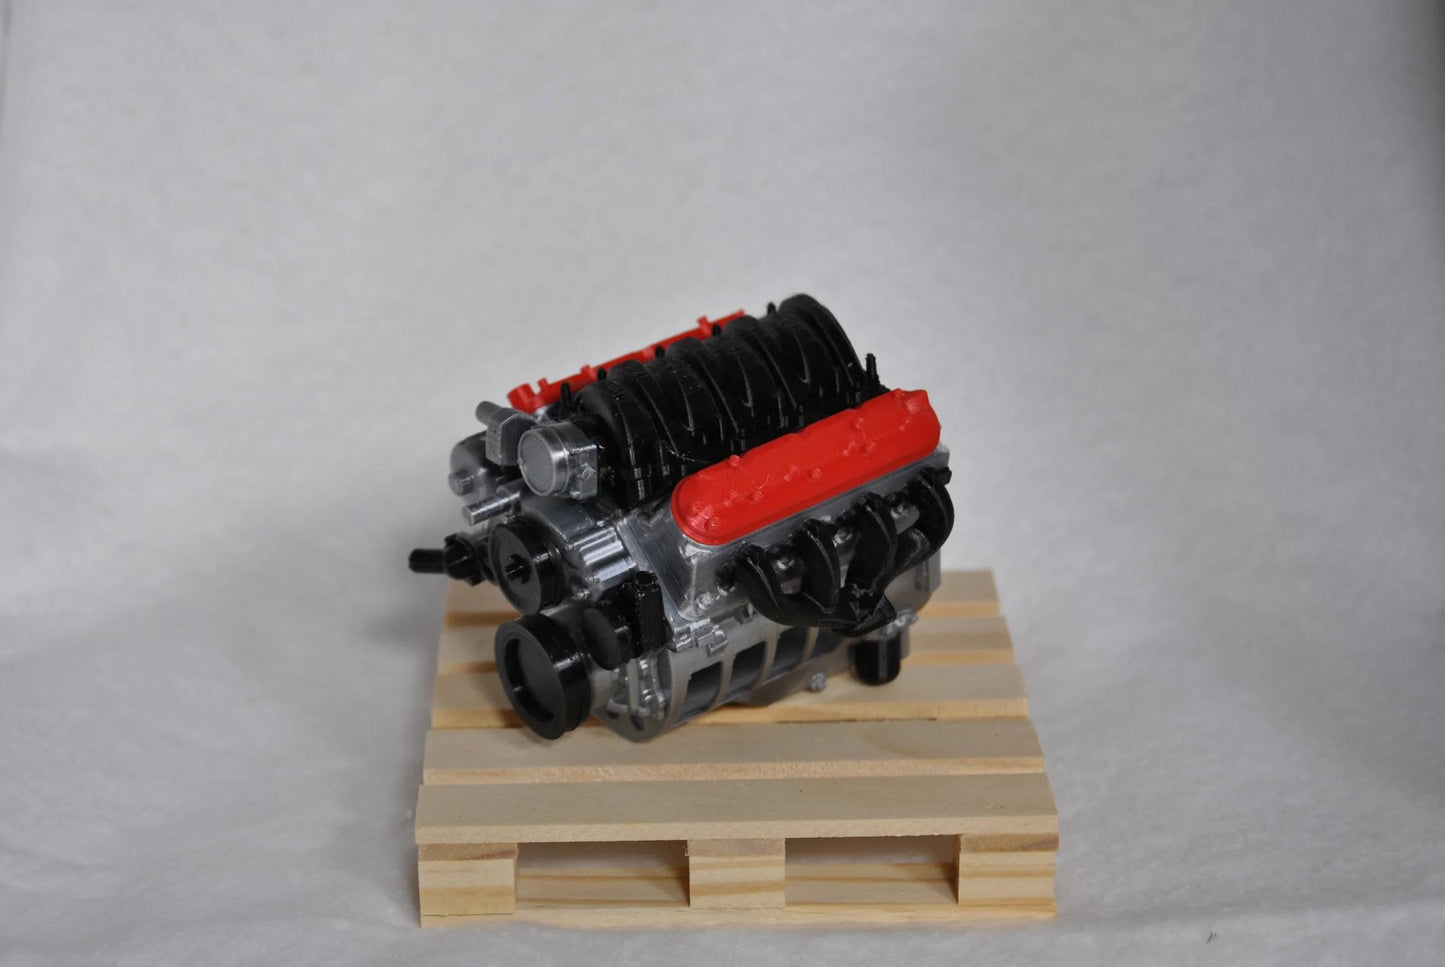 LS3 Motor Cover 1/10 Scale Engine DIY Kit